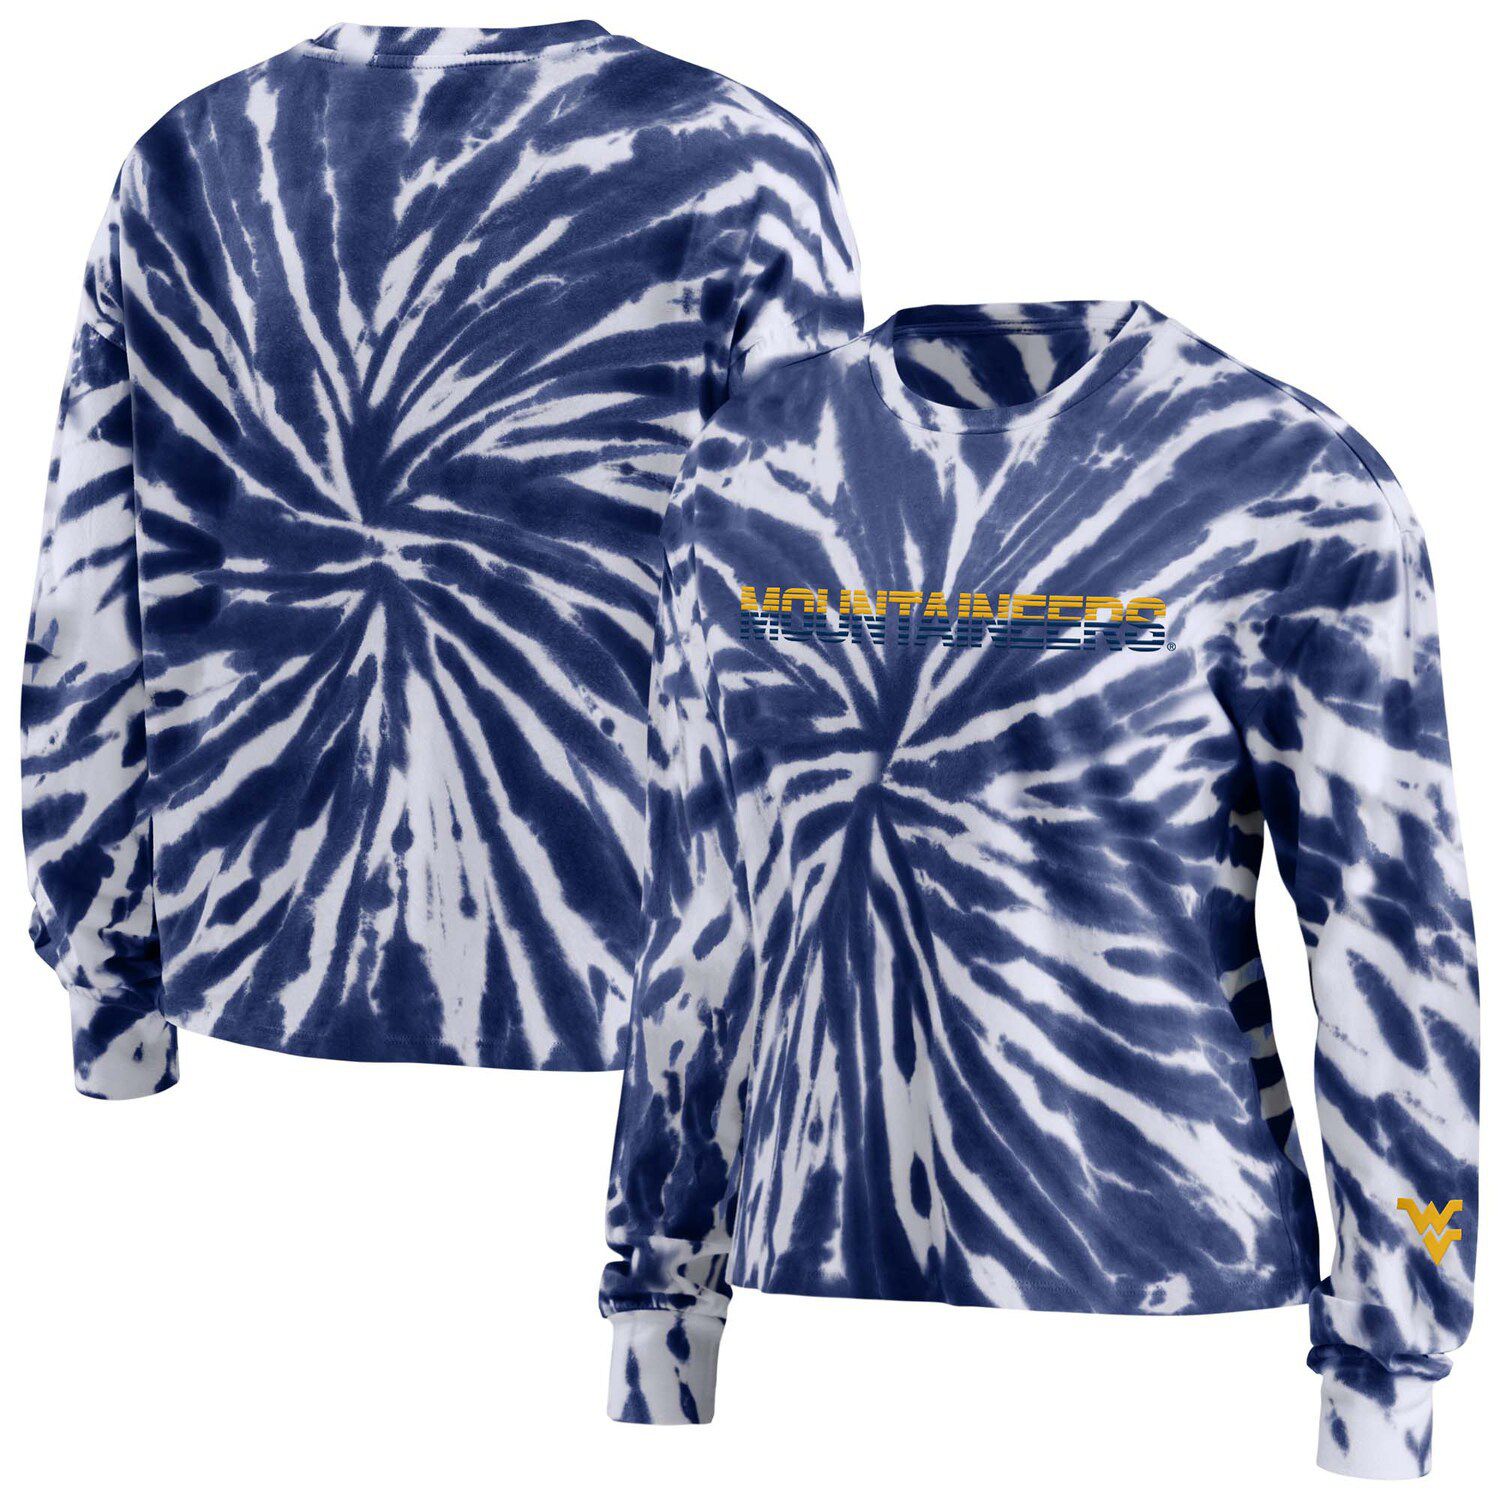 Image for Unbranded Women's WEAR by Erin Andrews Navy West Virginia Mountaineers Tie-Dye Long Sleeve T-Shirt at Kohl's.